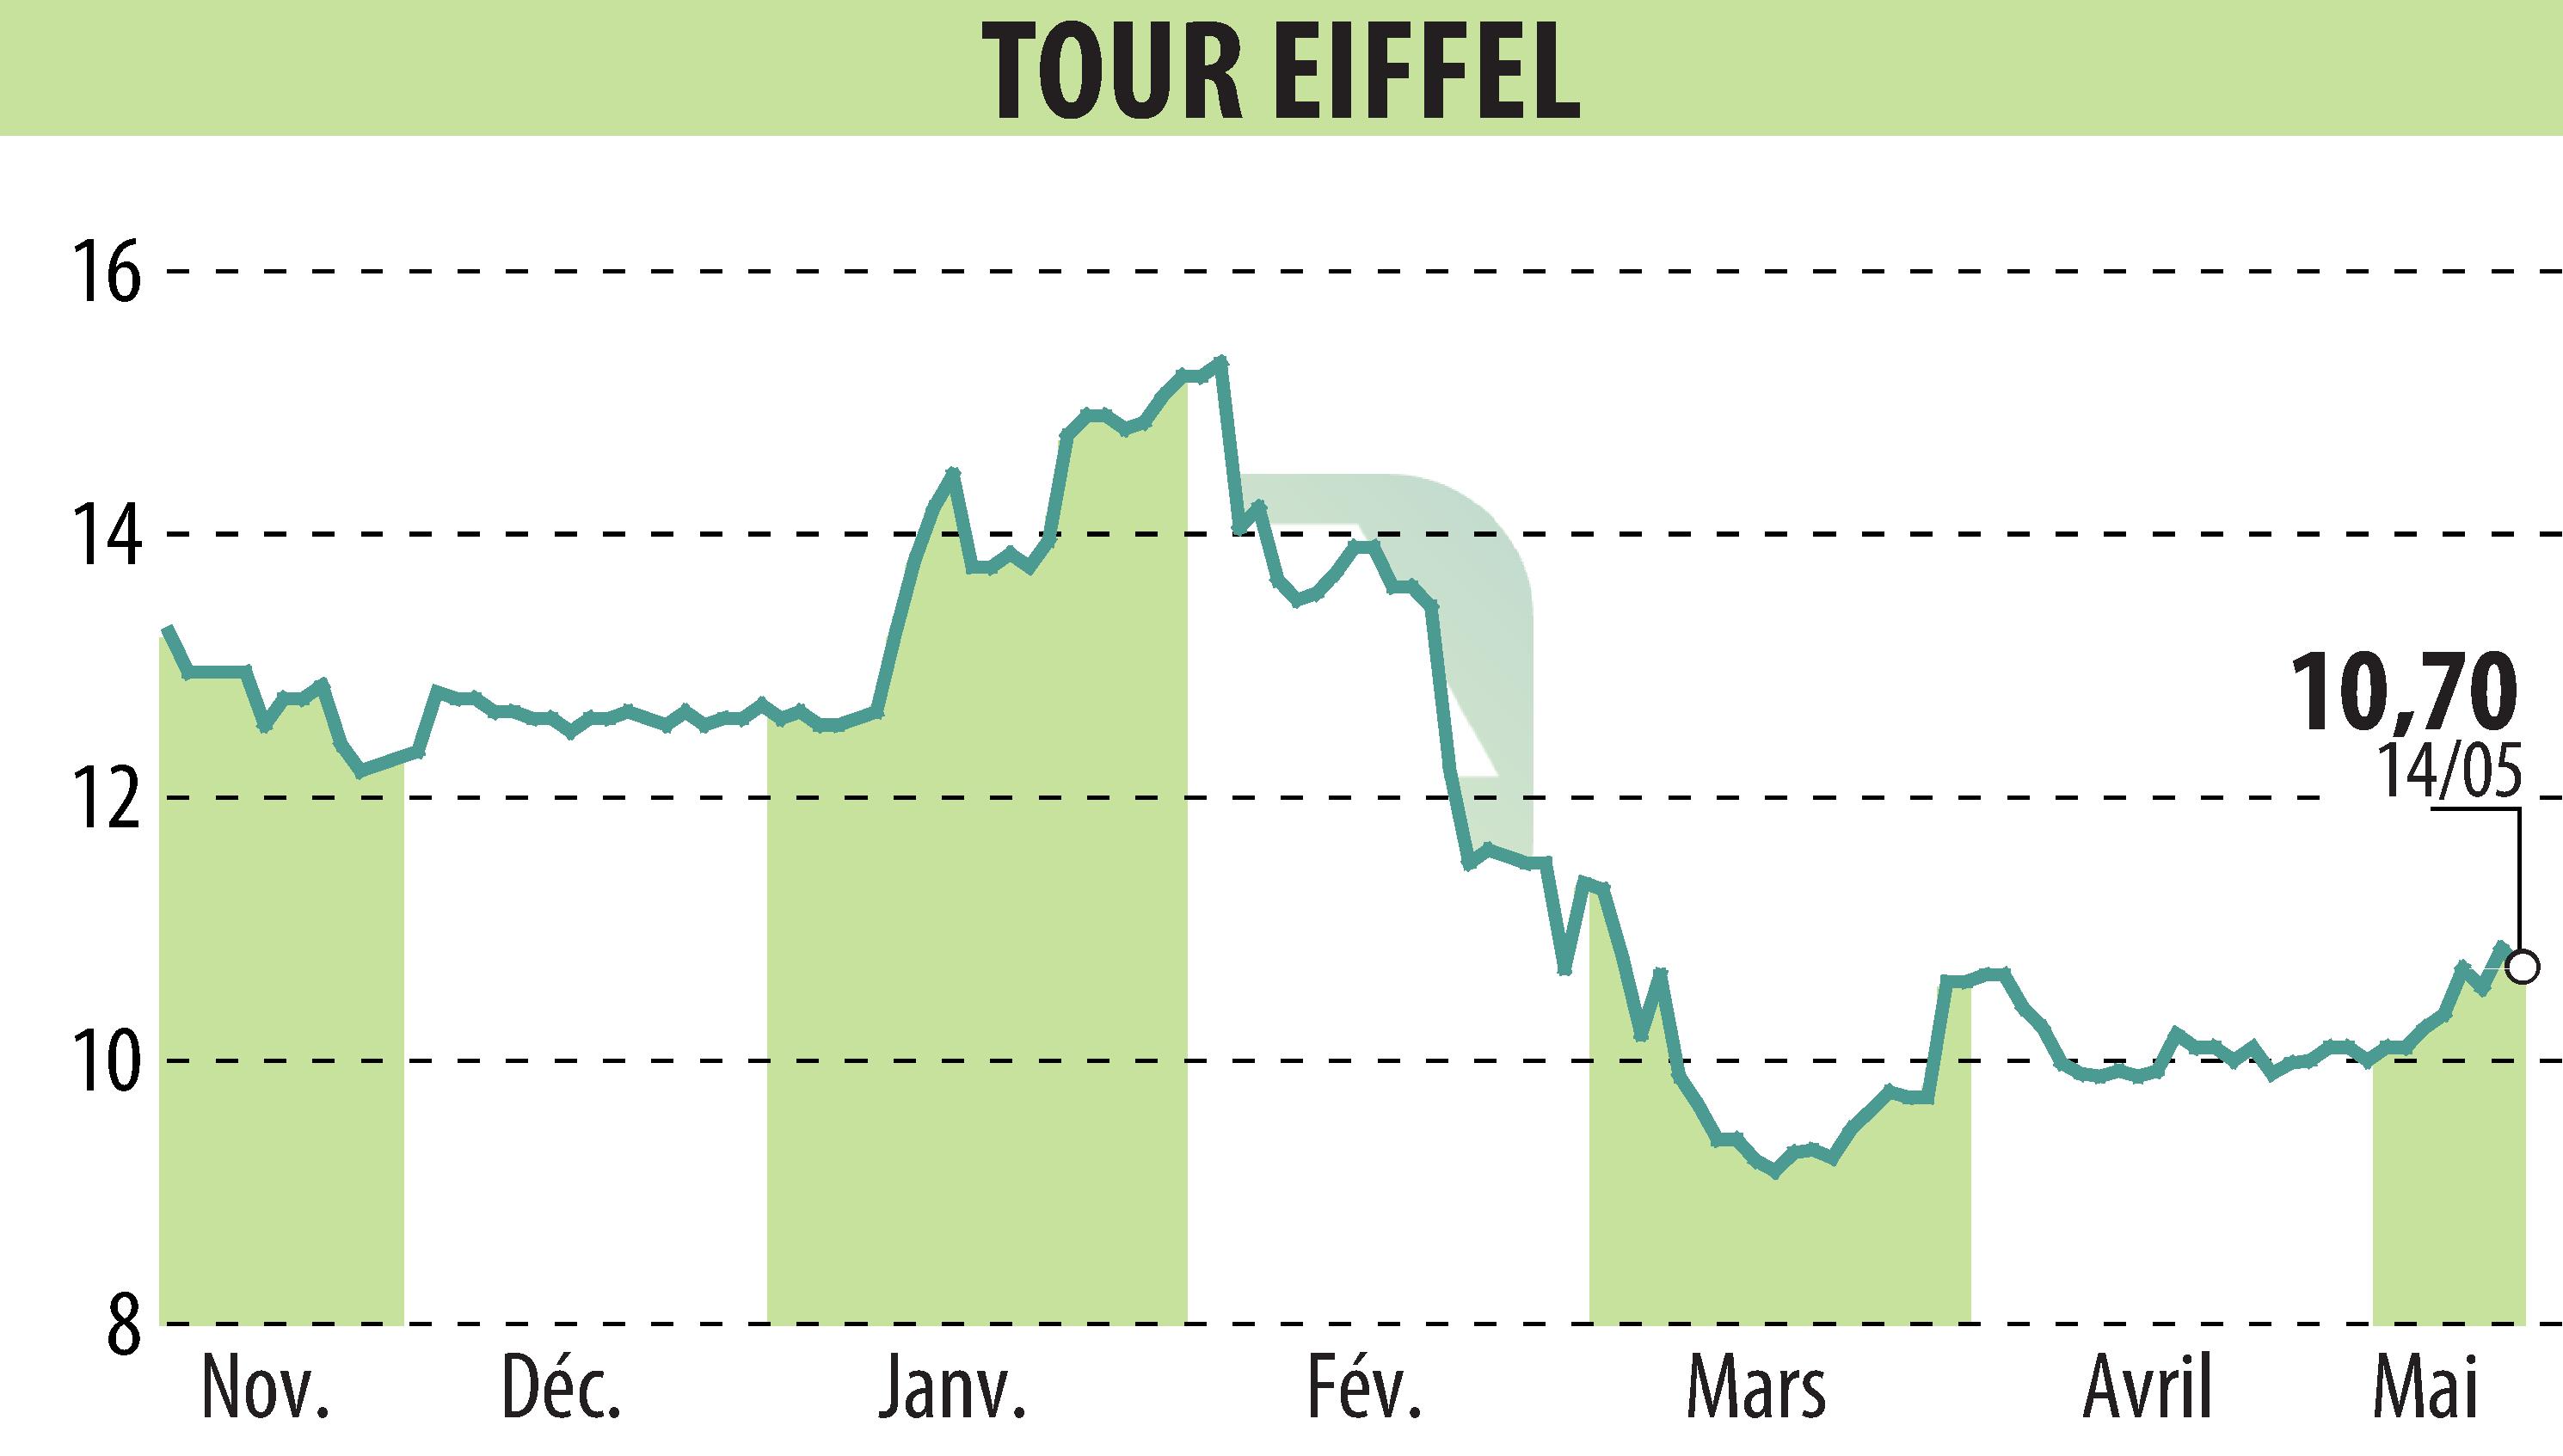 Stock price chart of TOUR EIFFEL (EPA:EIFF) showing fluctuations.